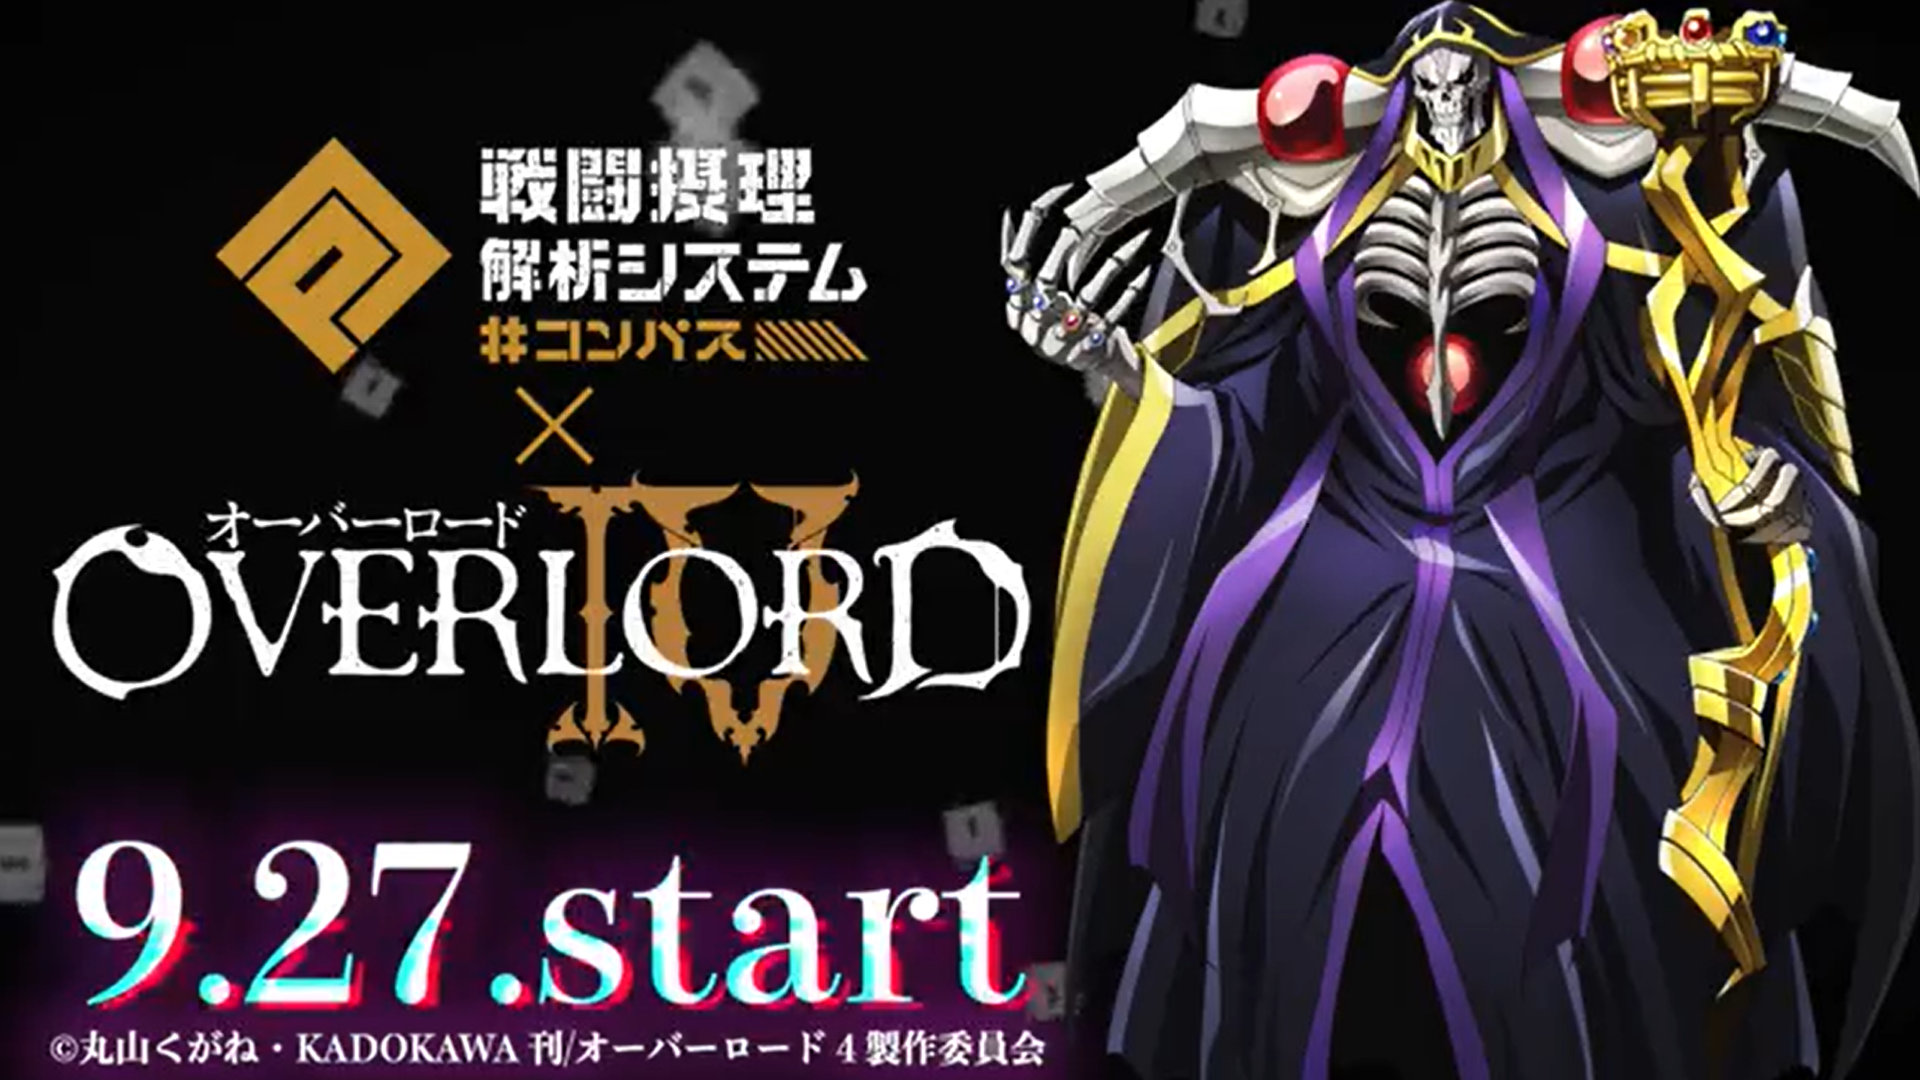 Overlord IV Ep. 1 | Sorcerer Kingdom Ains Ooal Gown: Ains Ooal Gown Nation  of Leading Darkness - YouTube